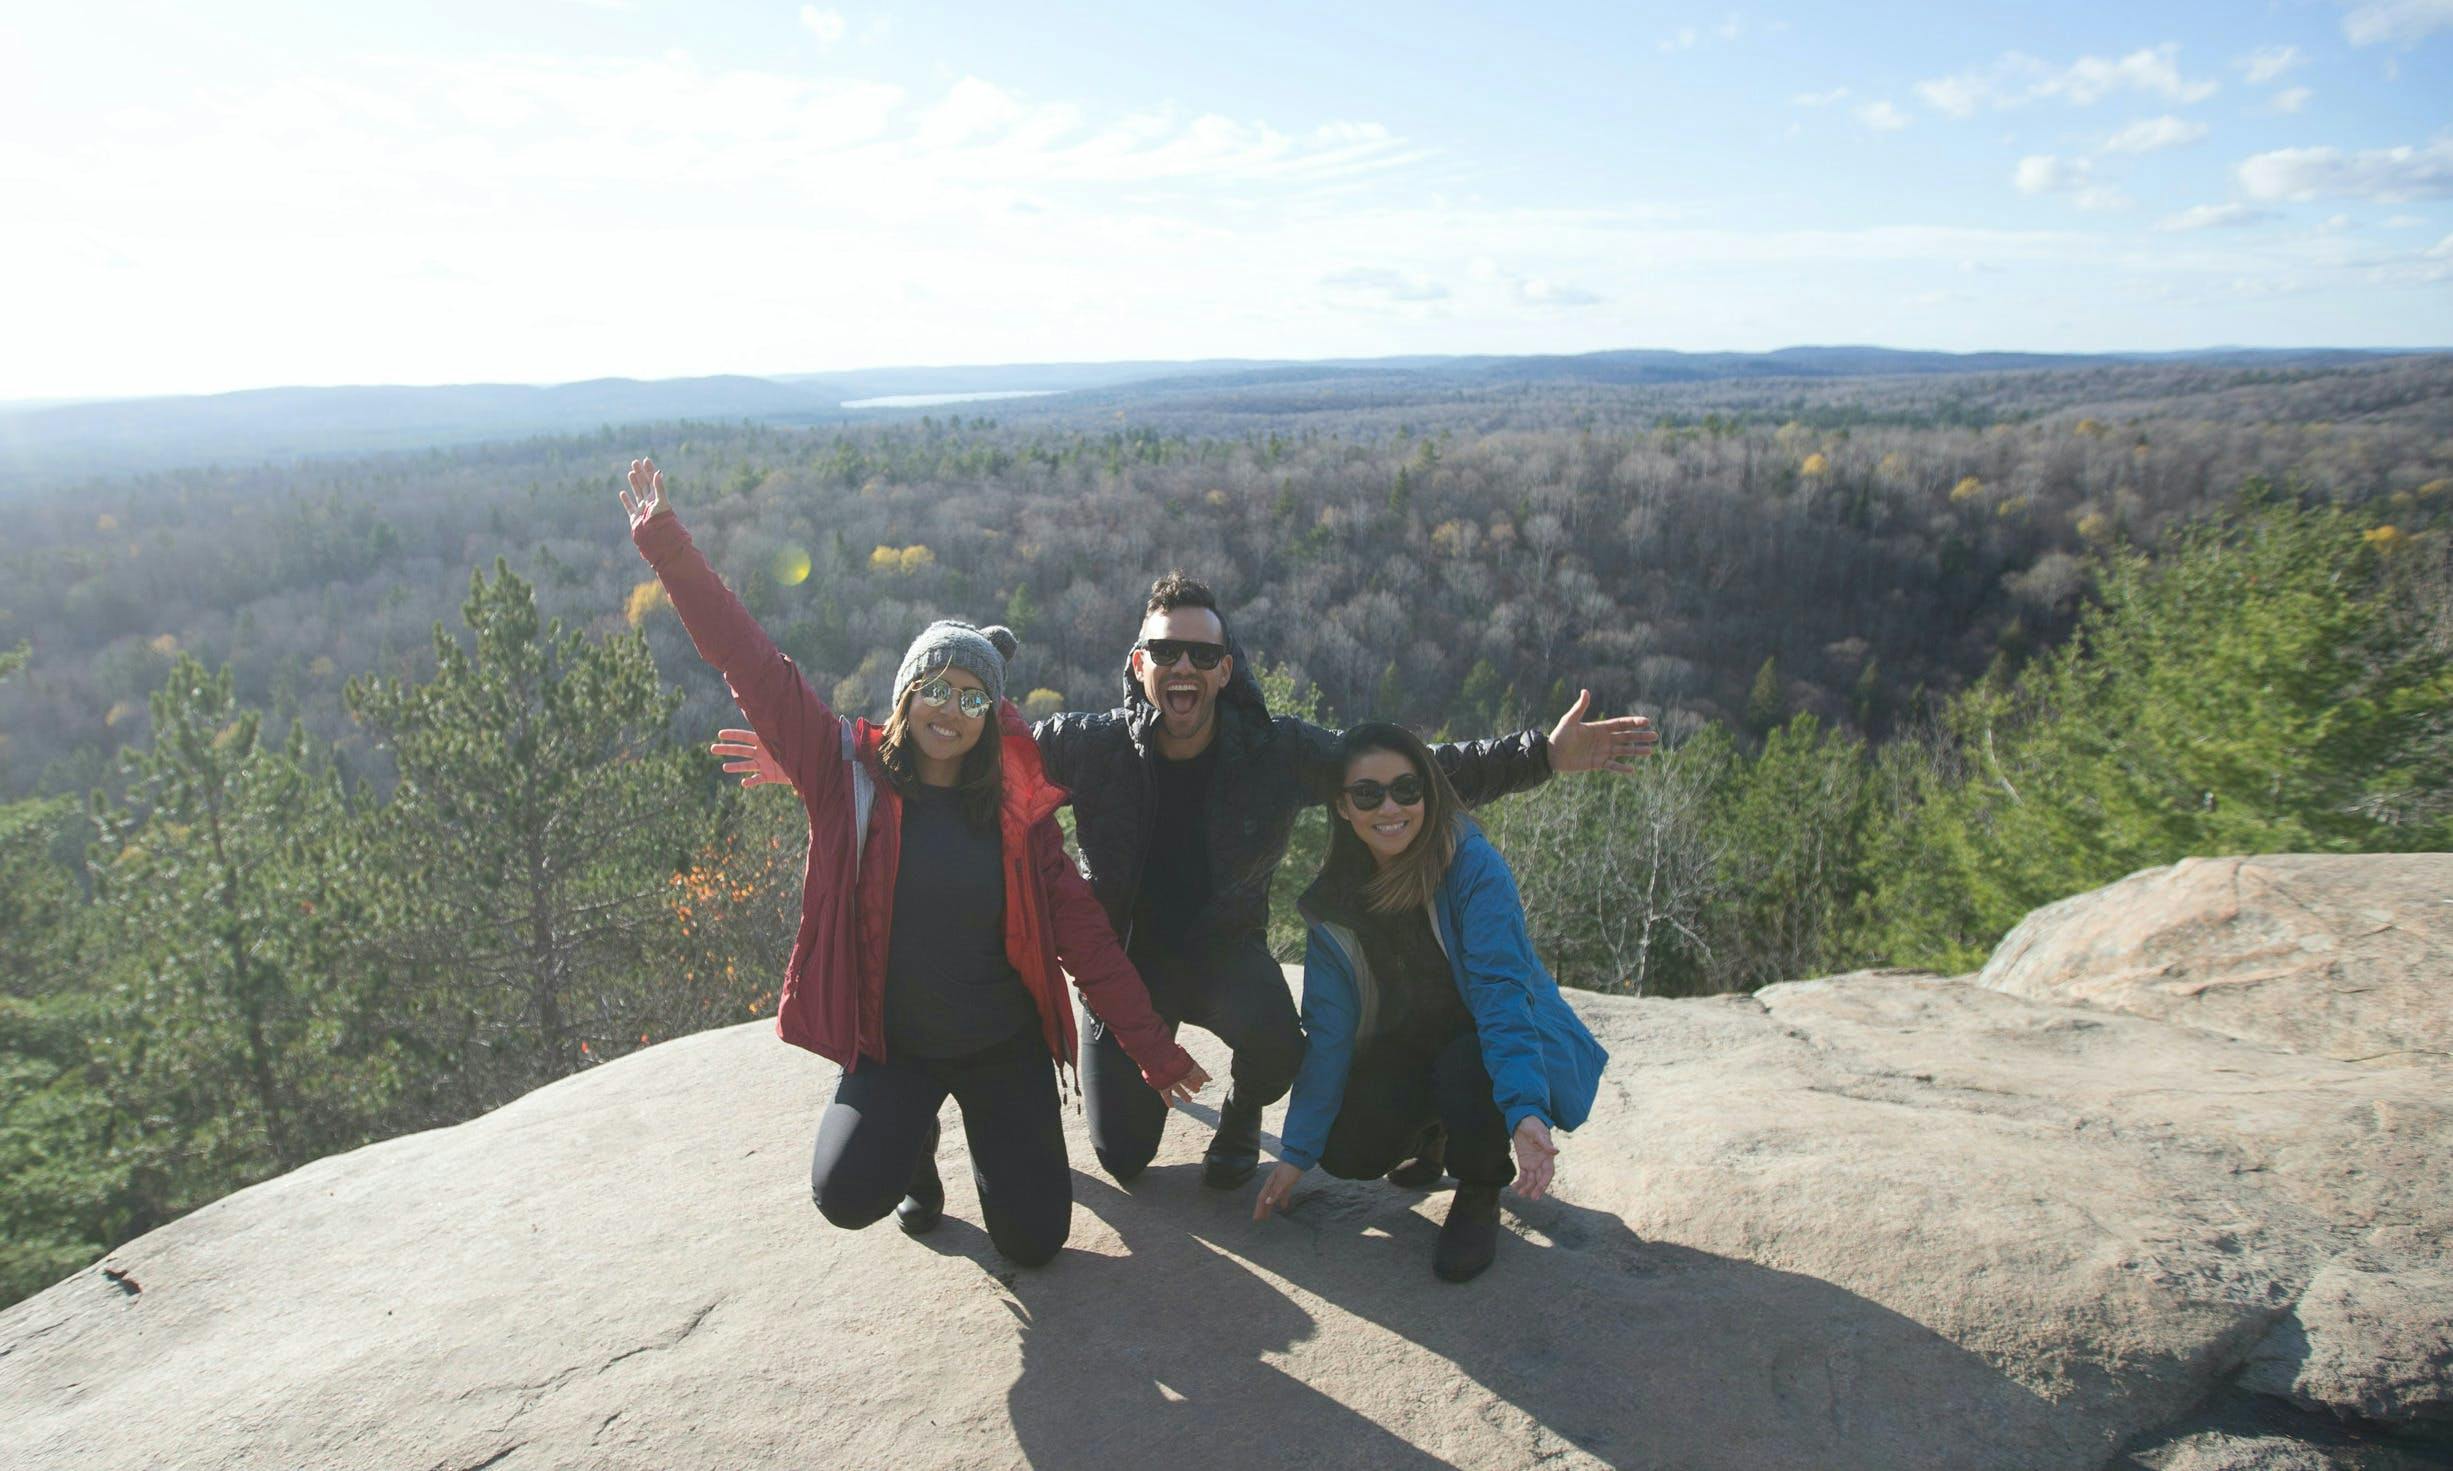 Three hikers posing for a photo on a rock